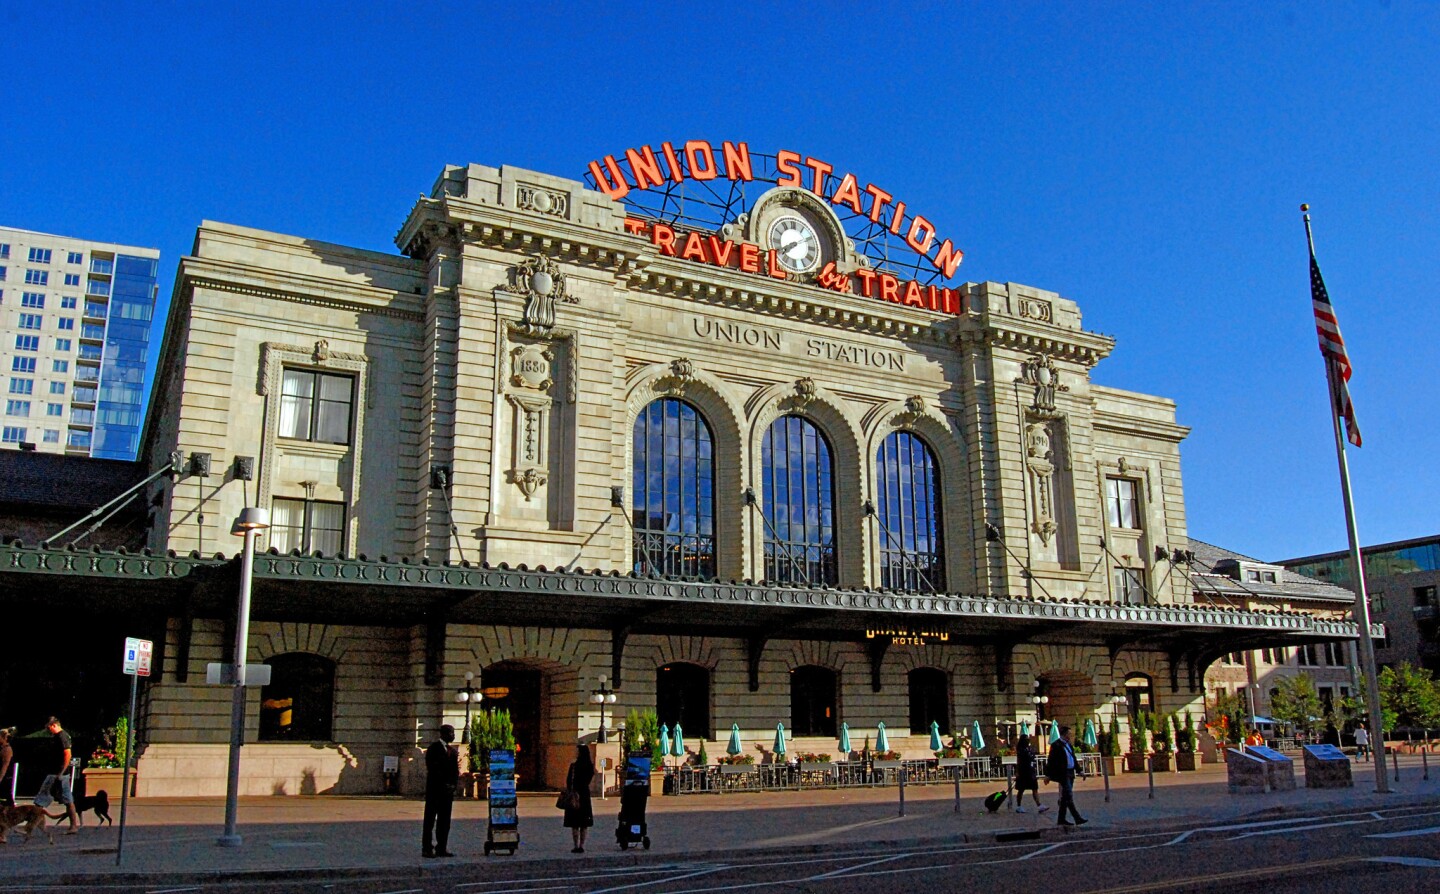 Denver Union Station's Wynkoop Street facade, The iconic neon sign dates from 1952.